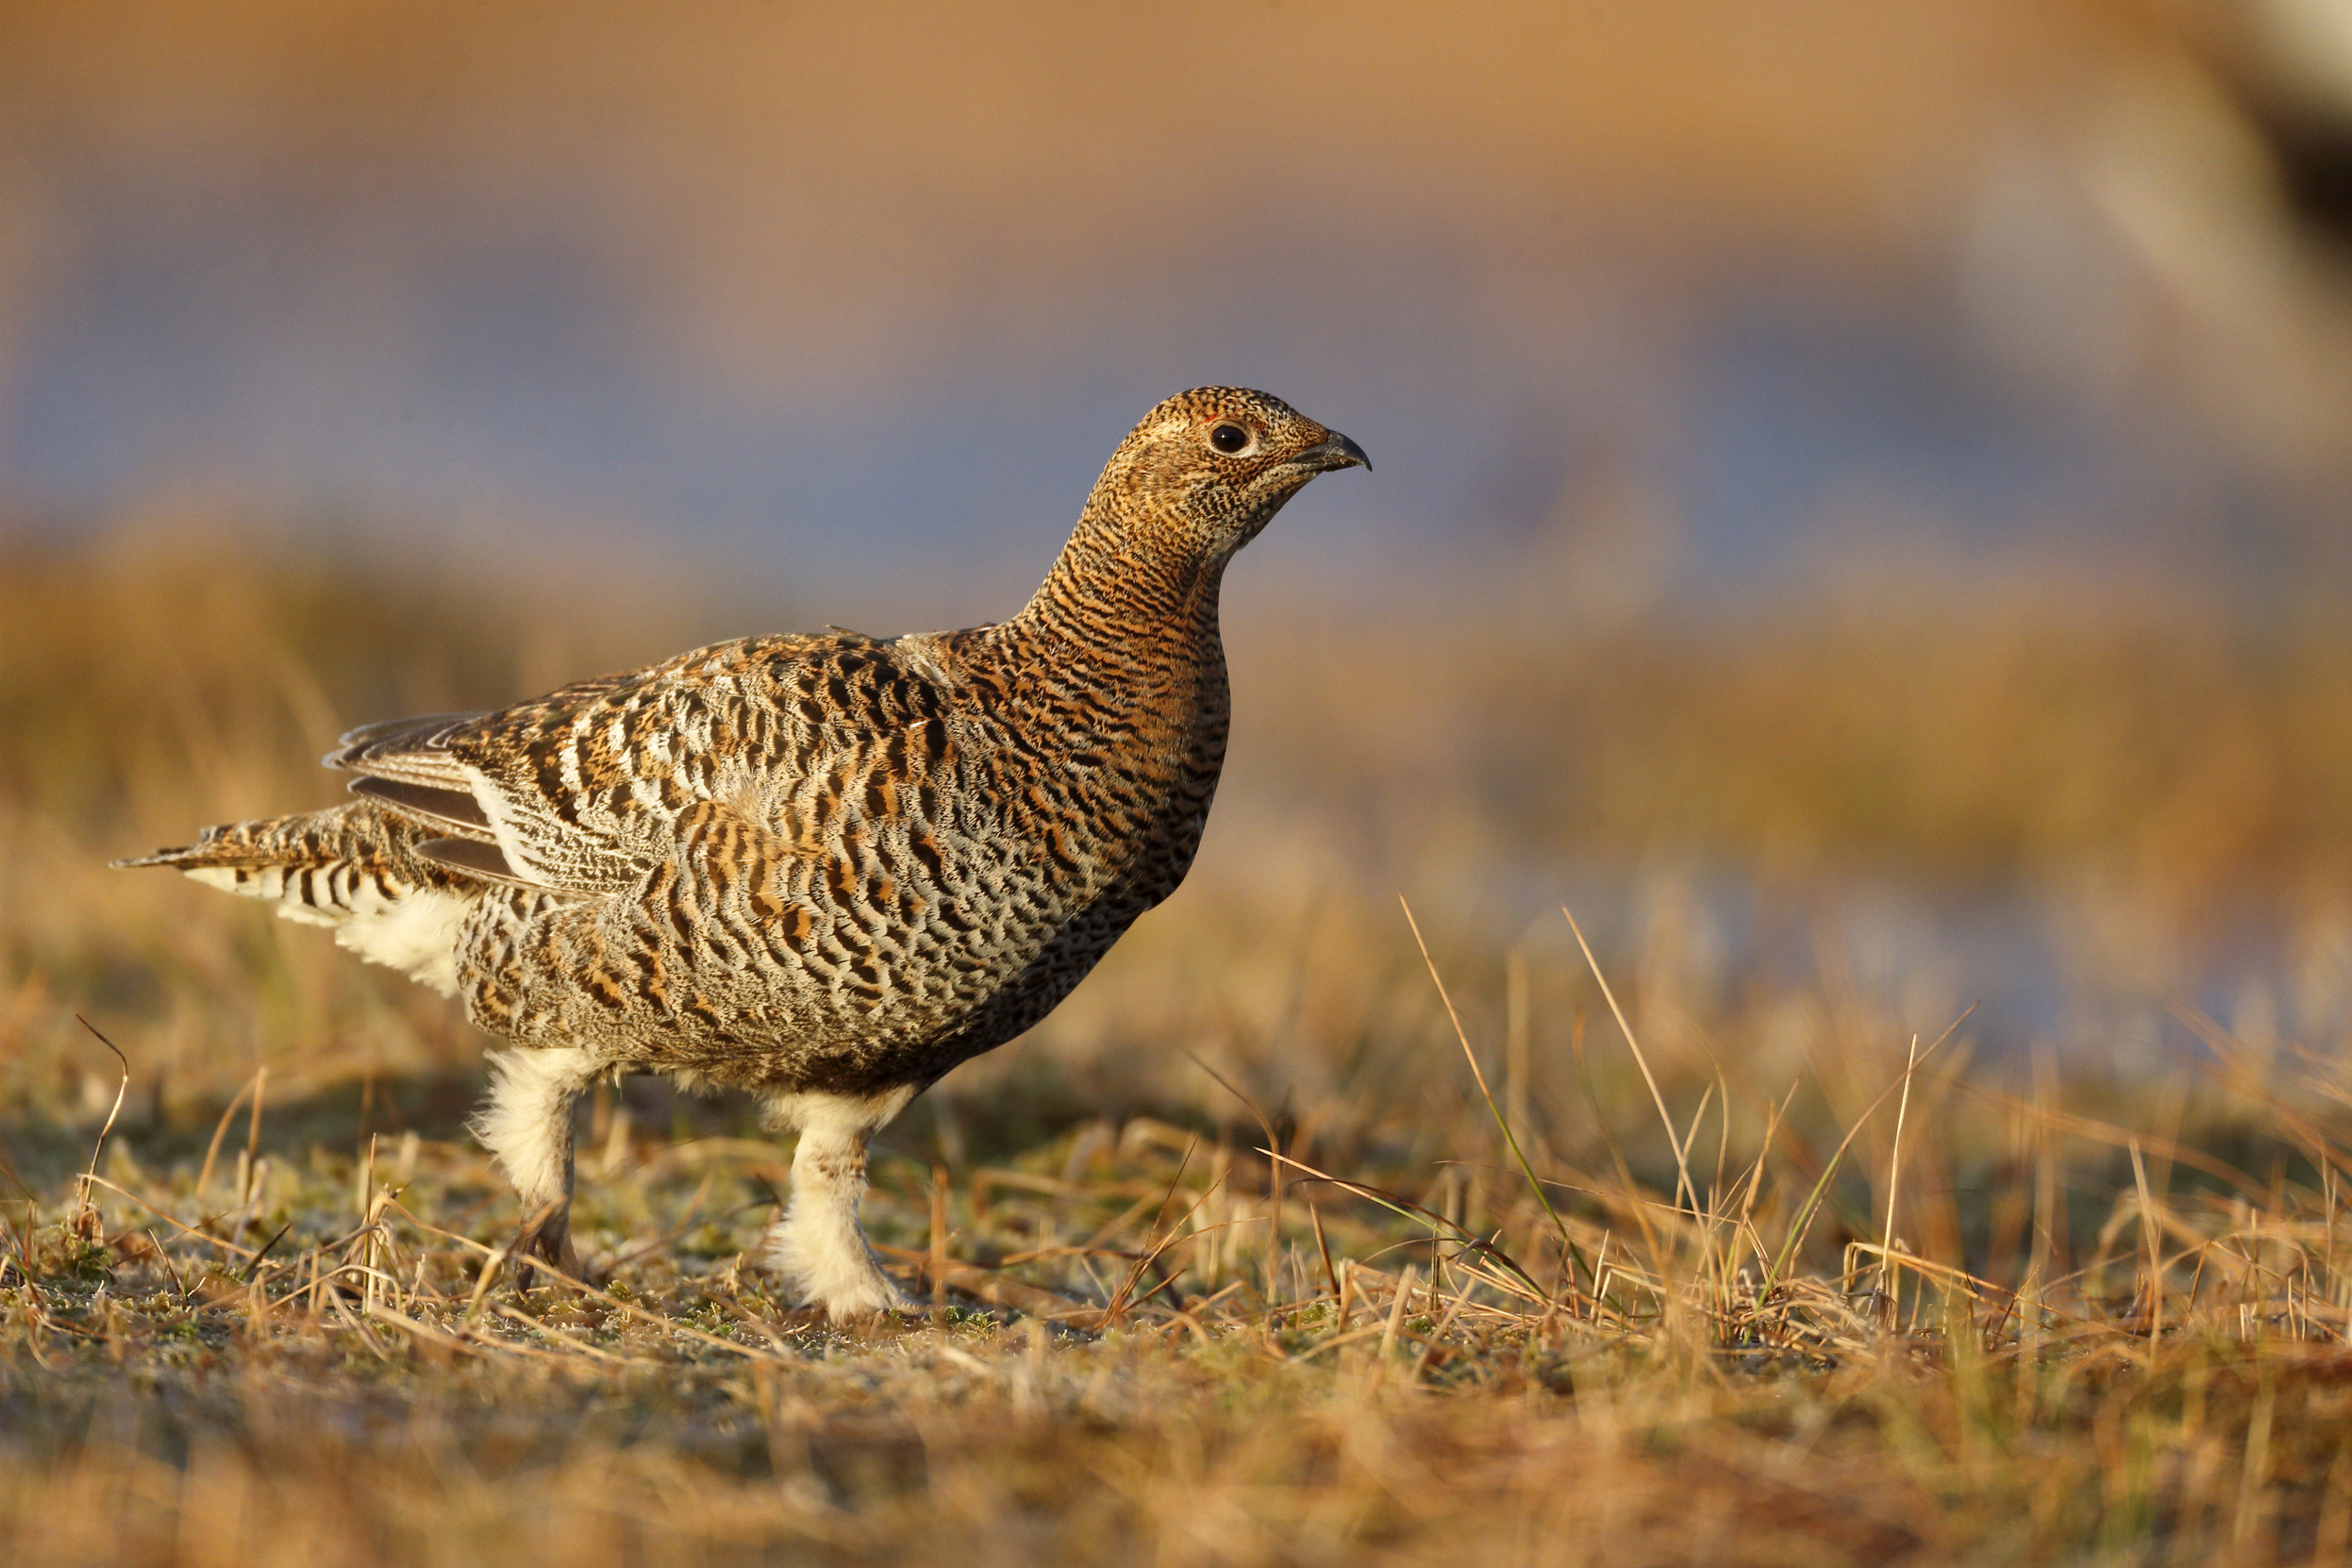 A female Black Grouse, with a mix of brown feathers, strolling across grassland.